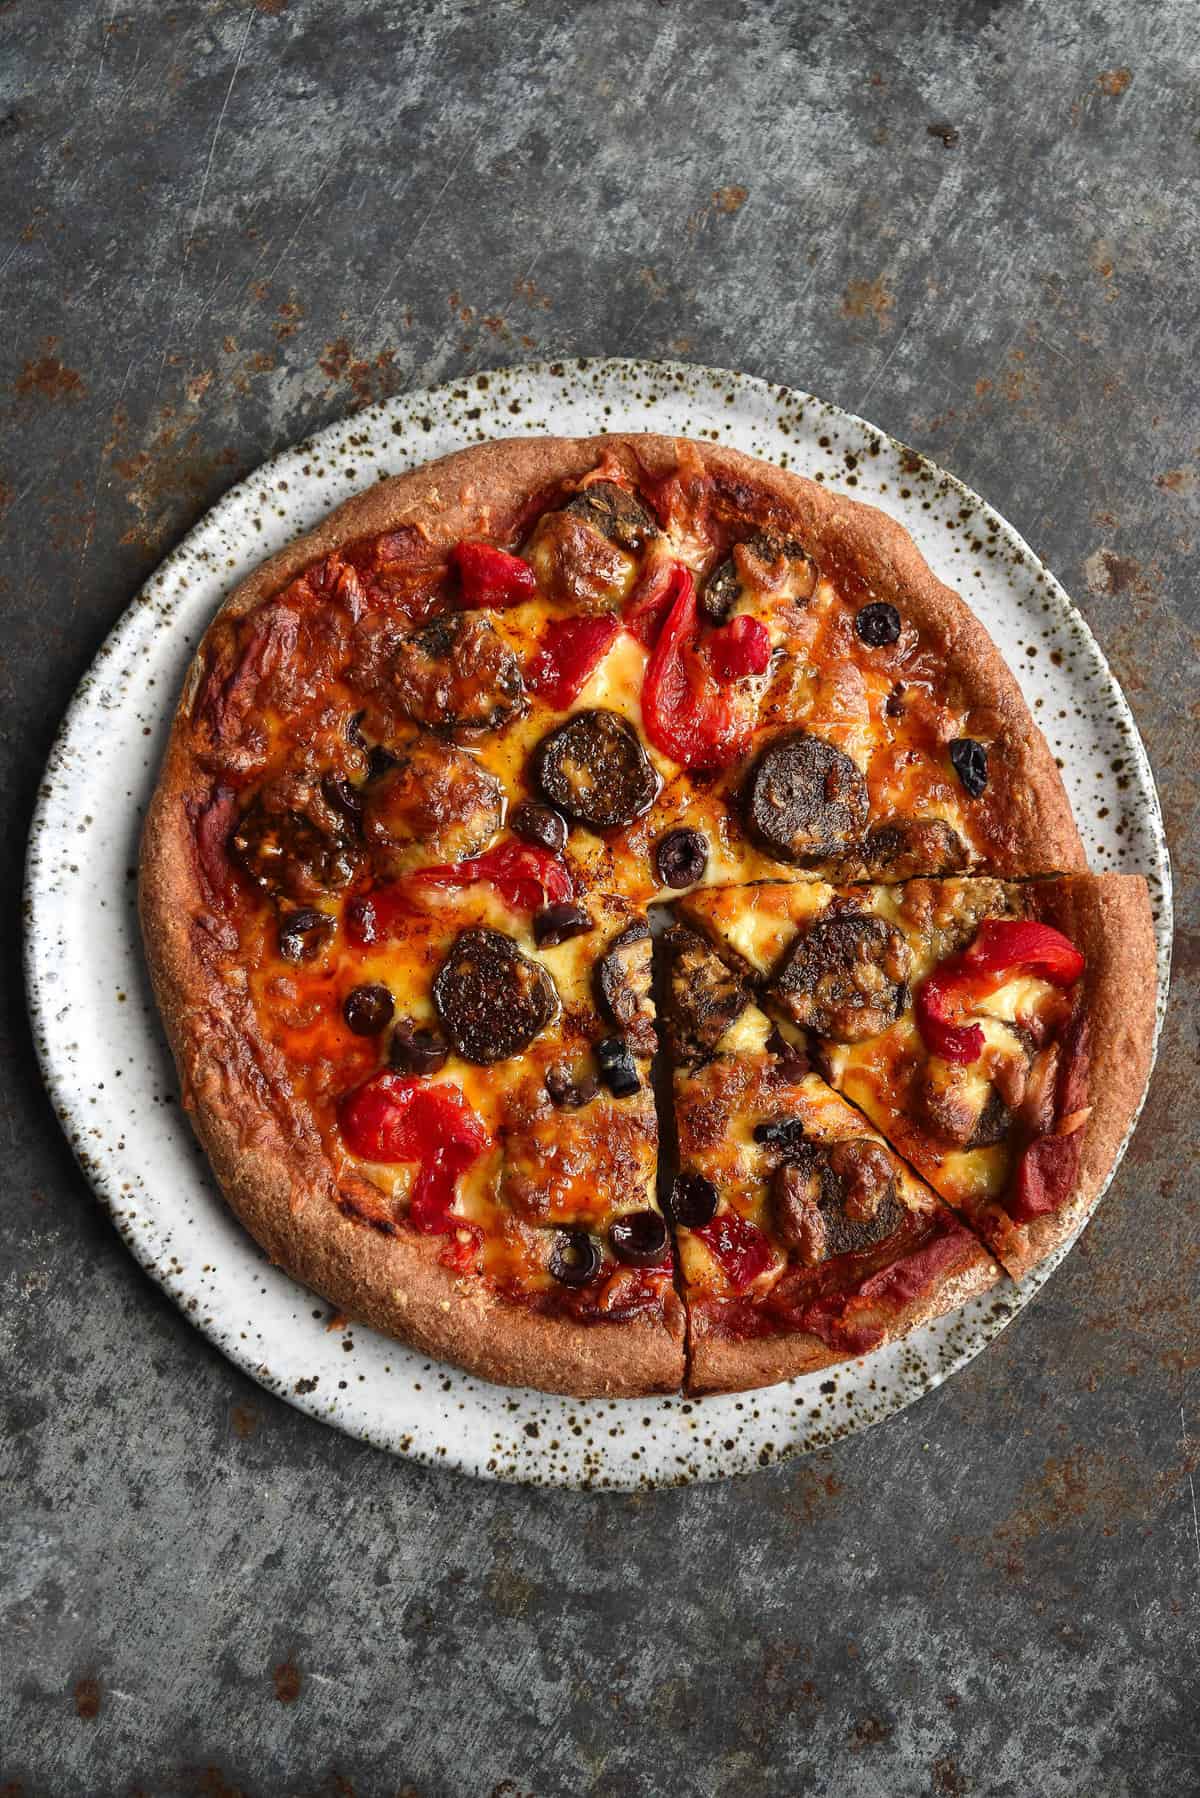 An aerial image of a gluten free pizza topped with low FODMAP pizza sauce, vegan sausage and black olives. The pizza sits atop a white speckled ceramic plate on a mottled steel backdrop.